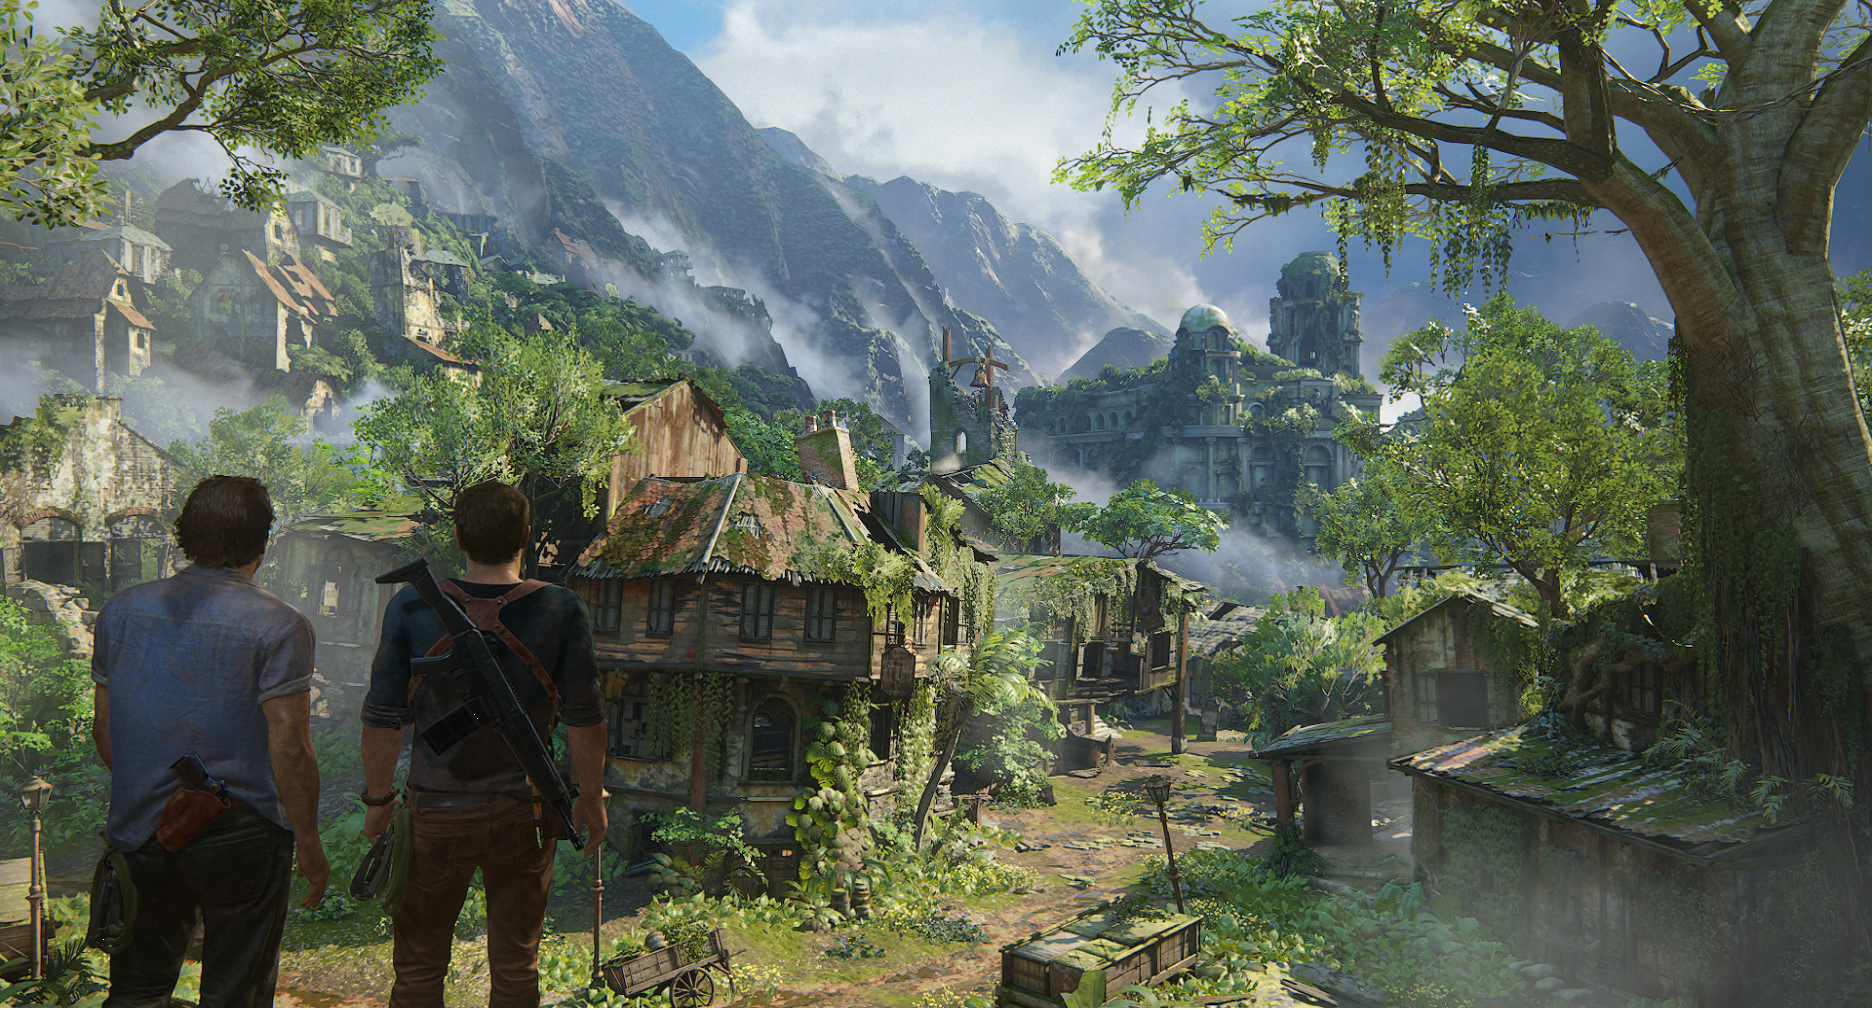 Uncharted 4: A Thief's End Uncharted has always been about reimagining landscapes, both real and fictional. Our goal is to completely immerse the player in a world where every detail is not only meticulously hand-crafted, but also placed with the intention of providing rich layers of environmental storytelling. This holds true not only in urban landscapes, but also in the lush, natural environments. We love showcasing vistas, such as this cityscape of the ruins of Libertalia, teasing players of the vast distances they will travel to their goal, along with the potential that they can visit just about anywhere they see along the way. 
                              
                              - Erick Pangilinan, Art Director, Uncharted 4